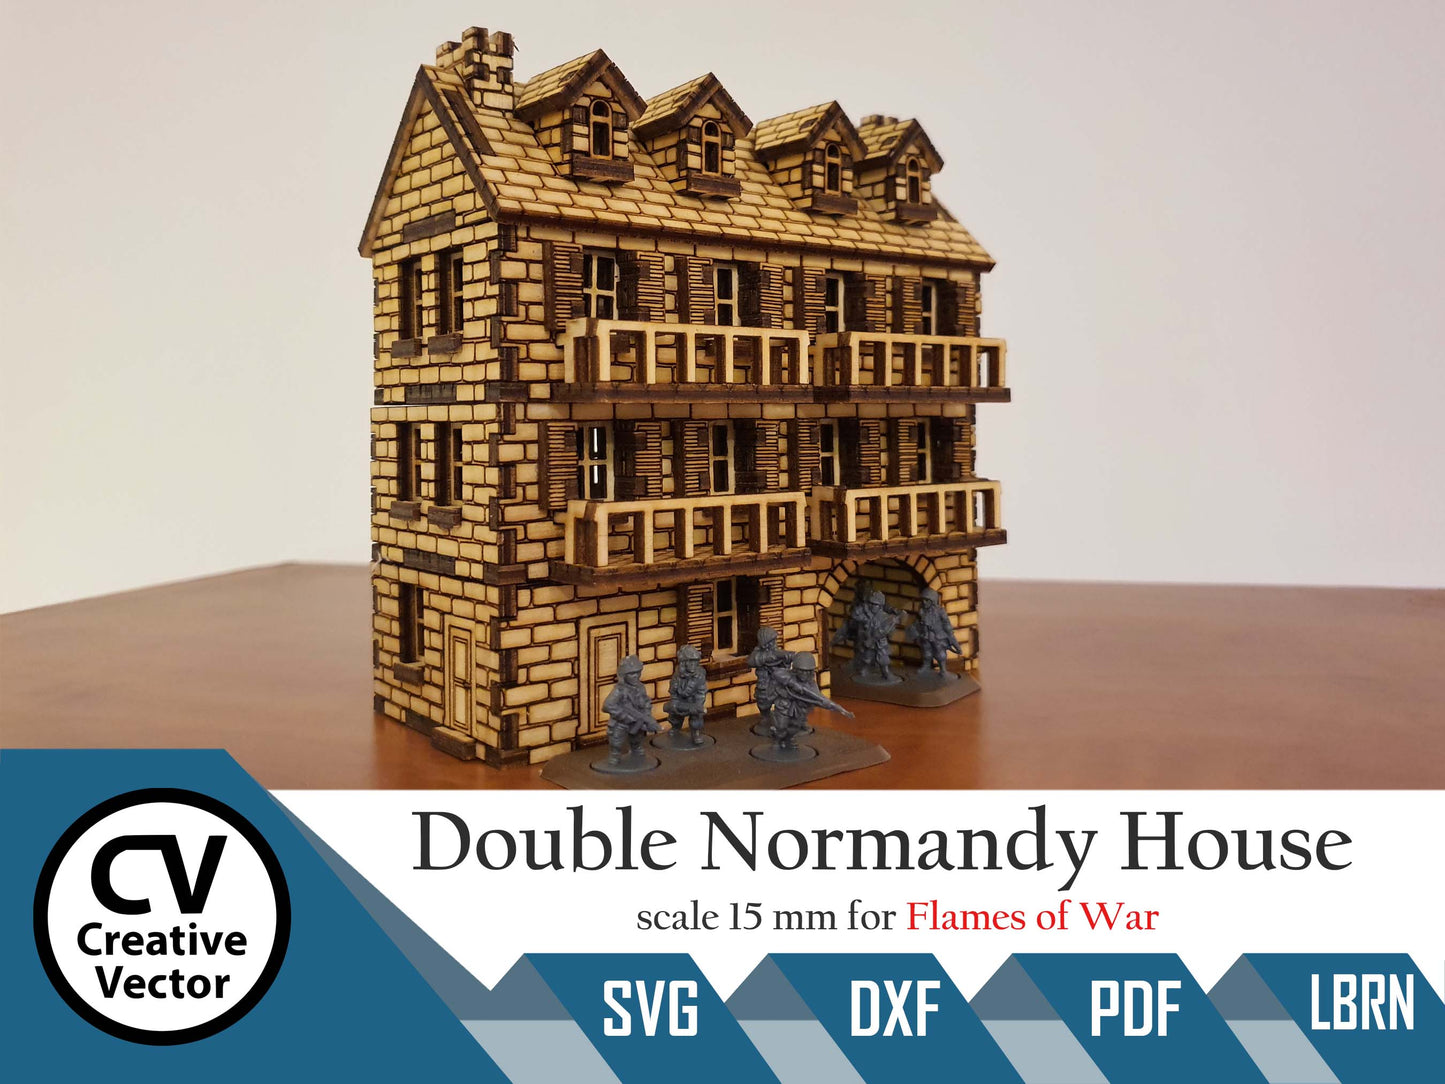 Double Normandy House with bacone in scale 15mm (1:100 / 1:87 / H0) for game Flames of War